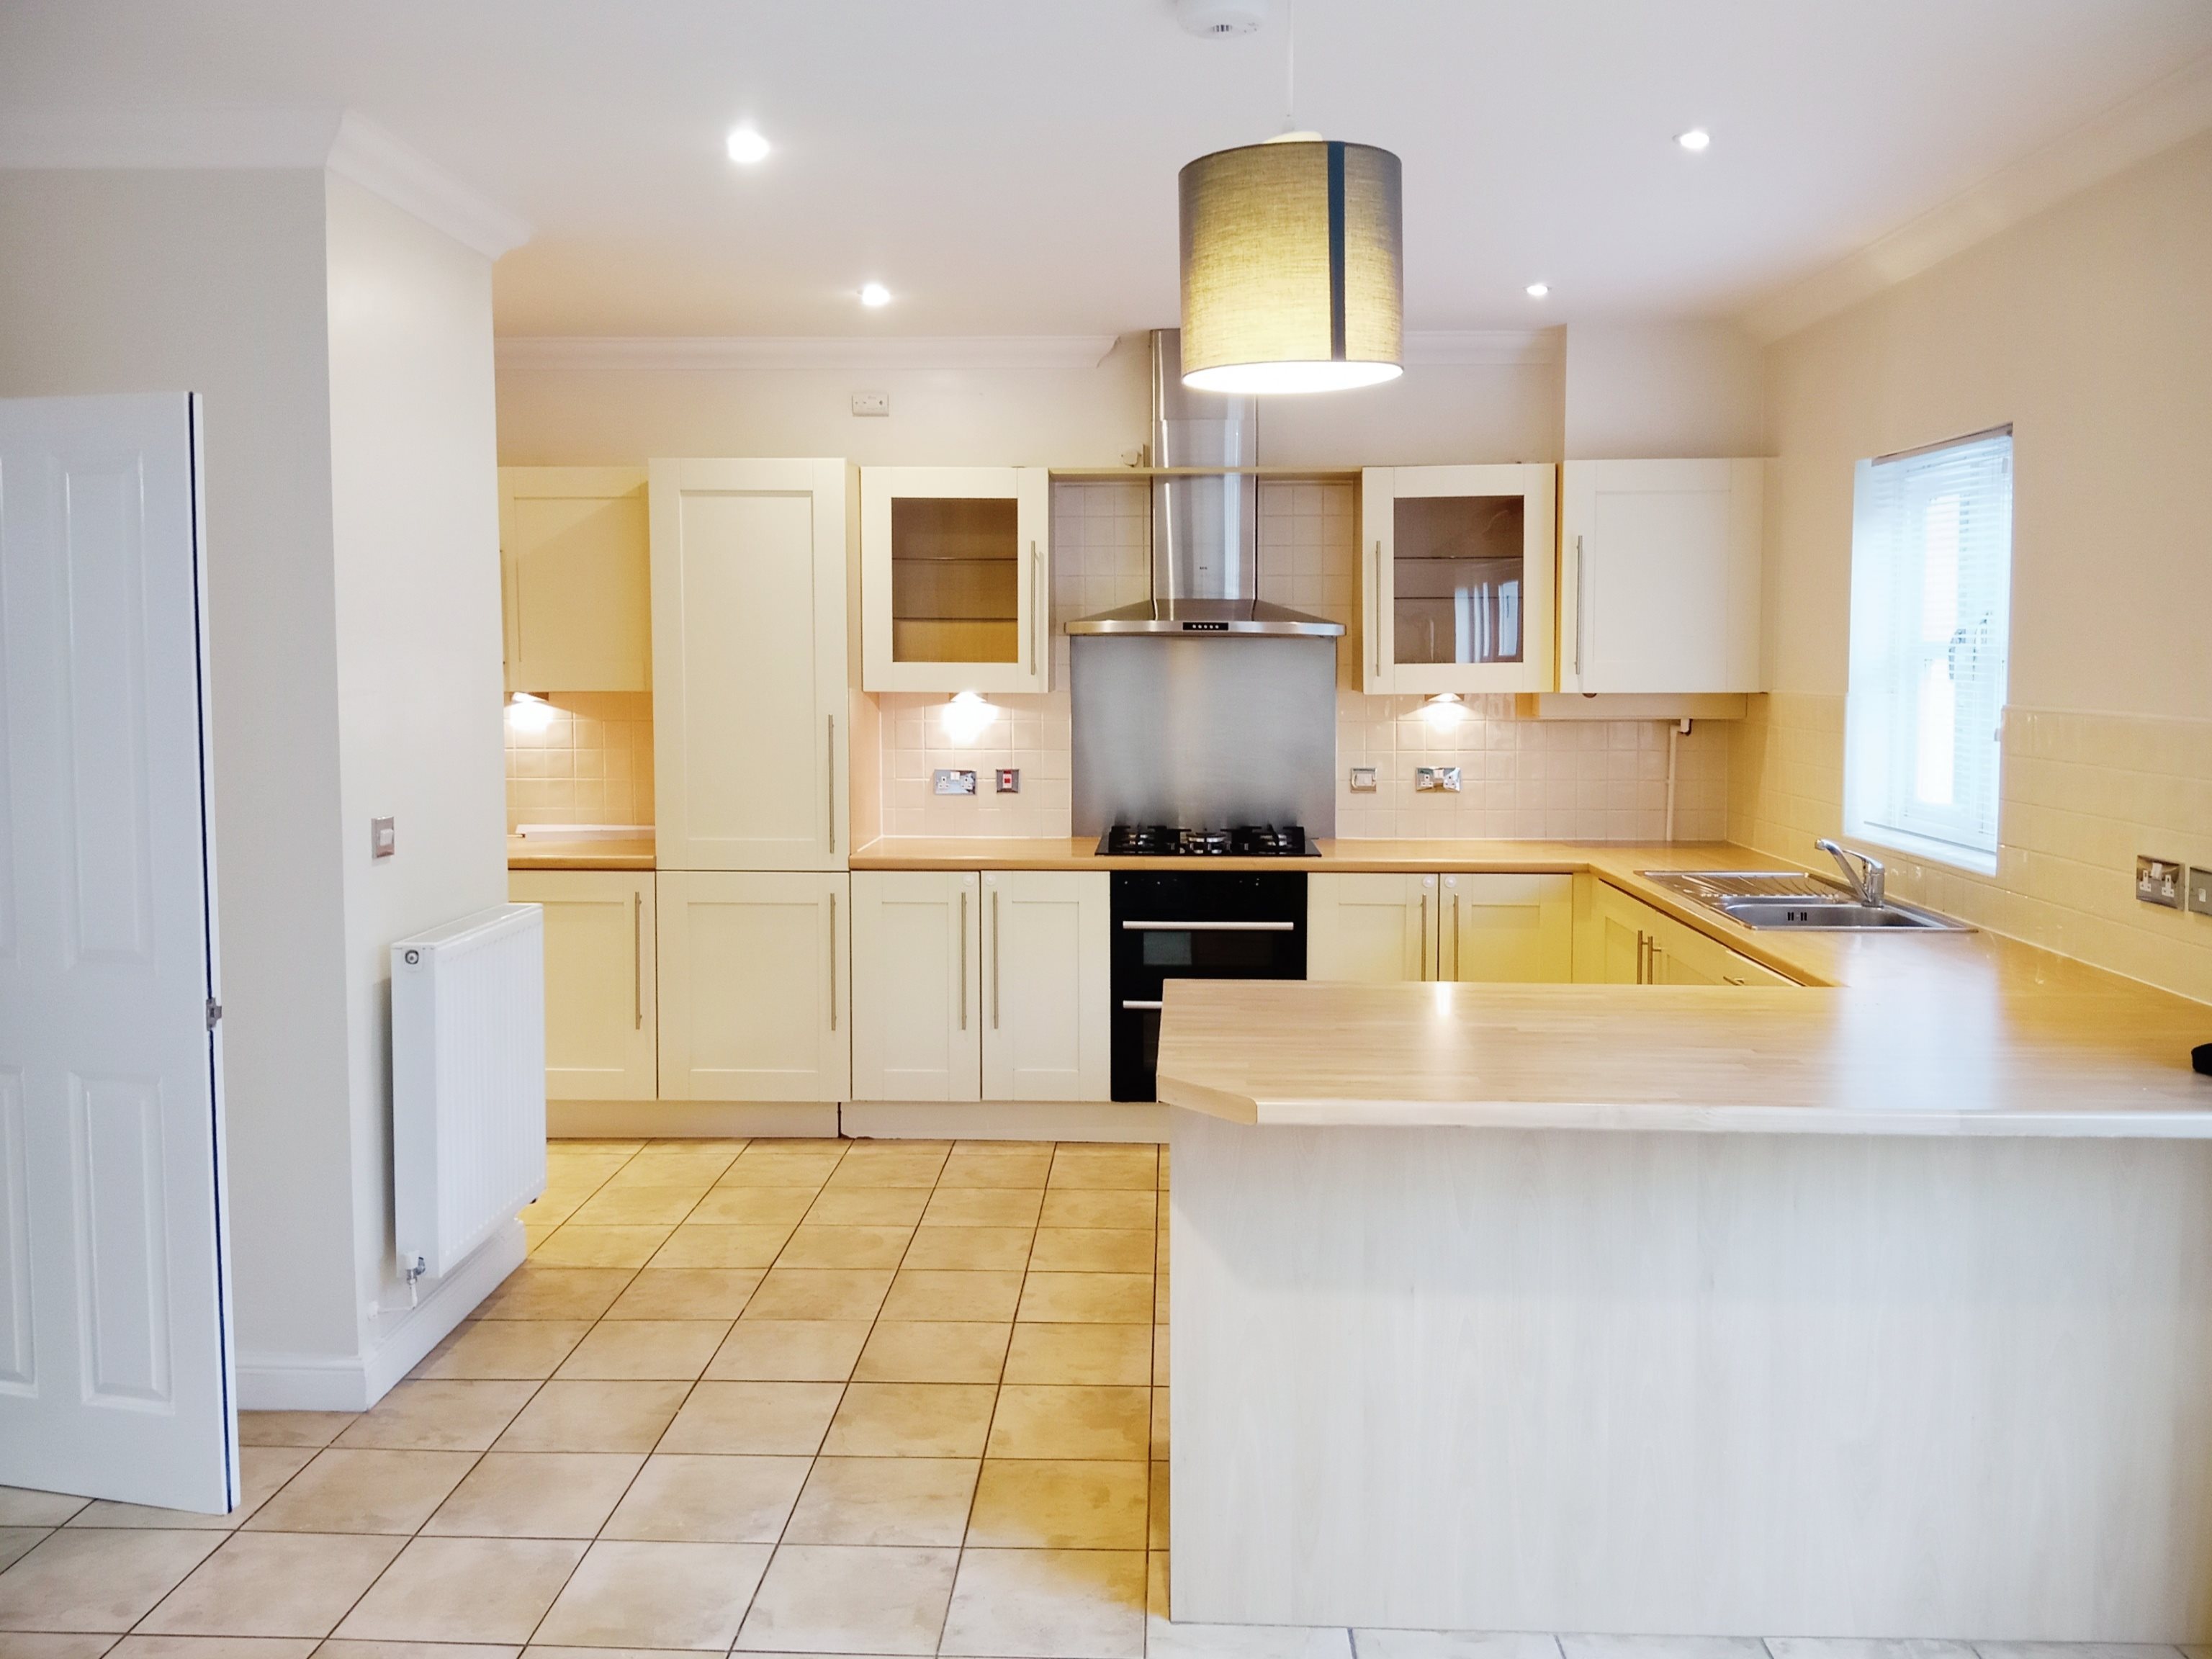 4 bed semi-detached house to rent - Property Image 1